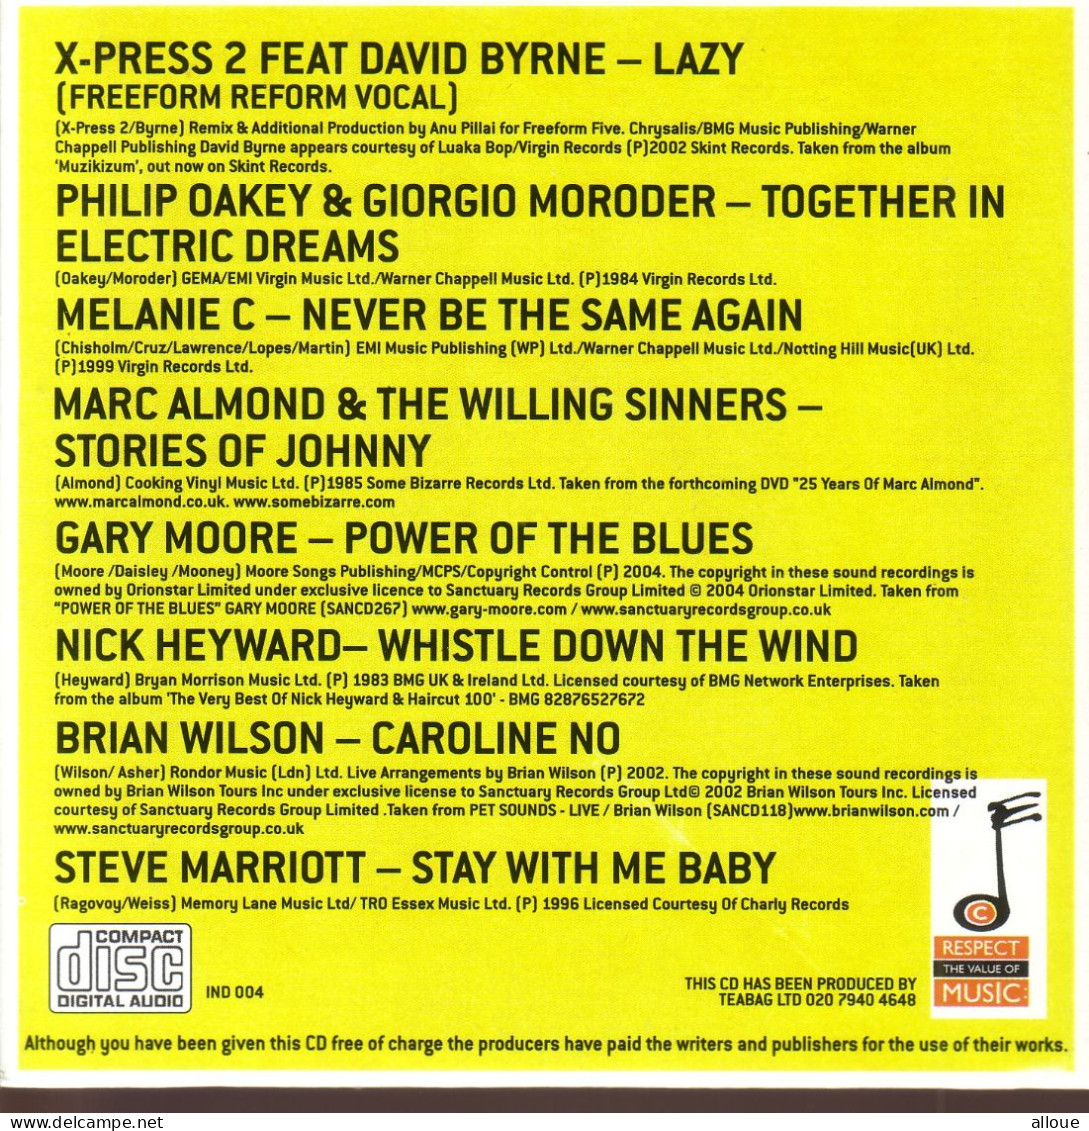 FREE AND SINGLE VOL 2 - CD THE INDEPENDENT - POCHETTE CARTON - X-PRESS 2 - PHILIP OAKEY-MELANIE C-MARC ALMOND - Other - English Music